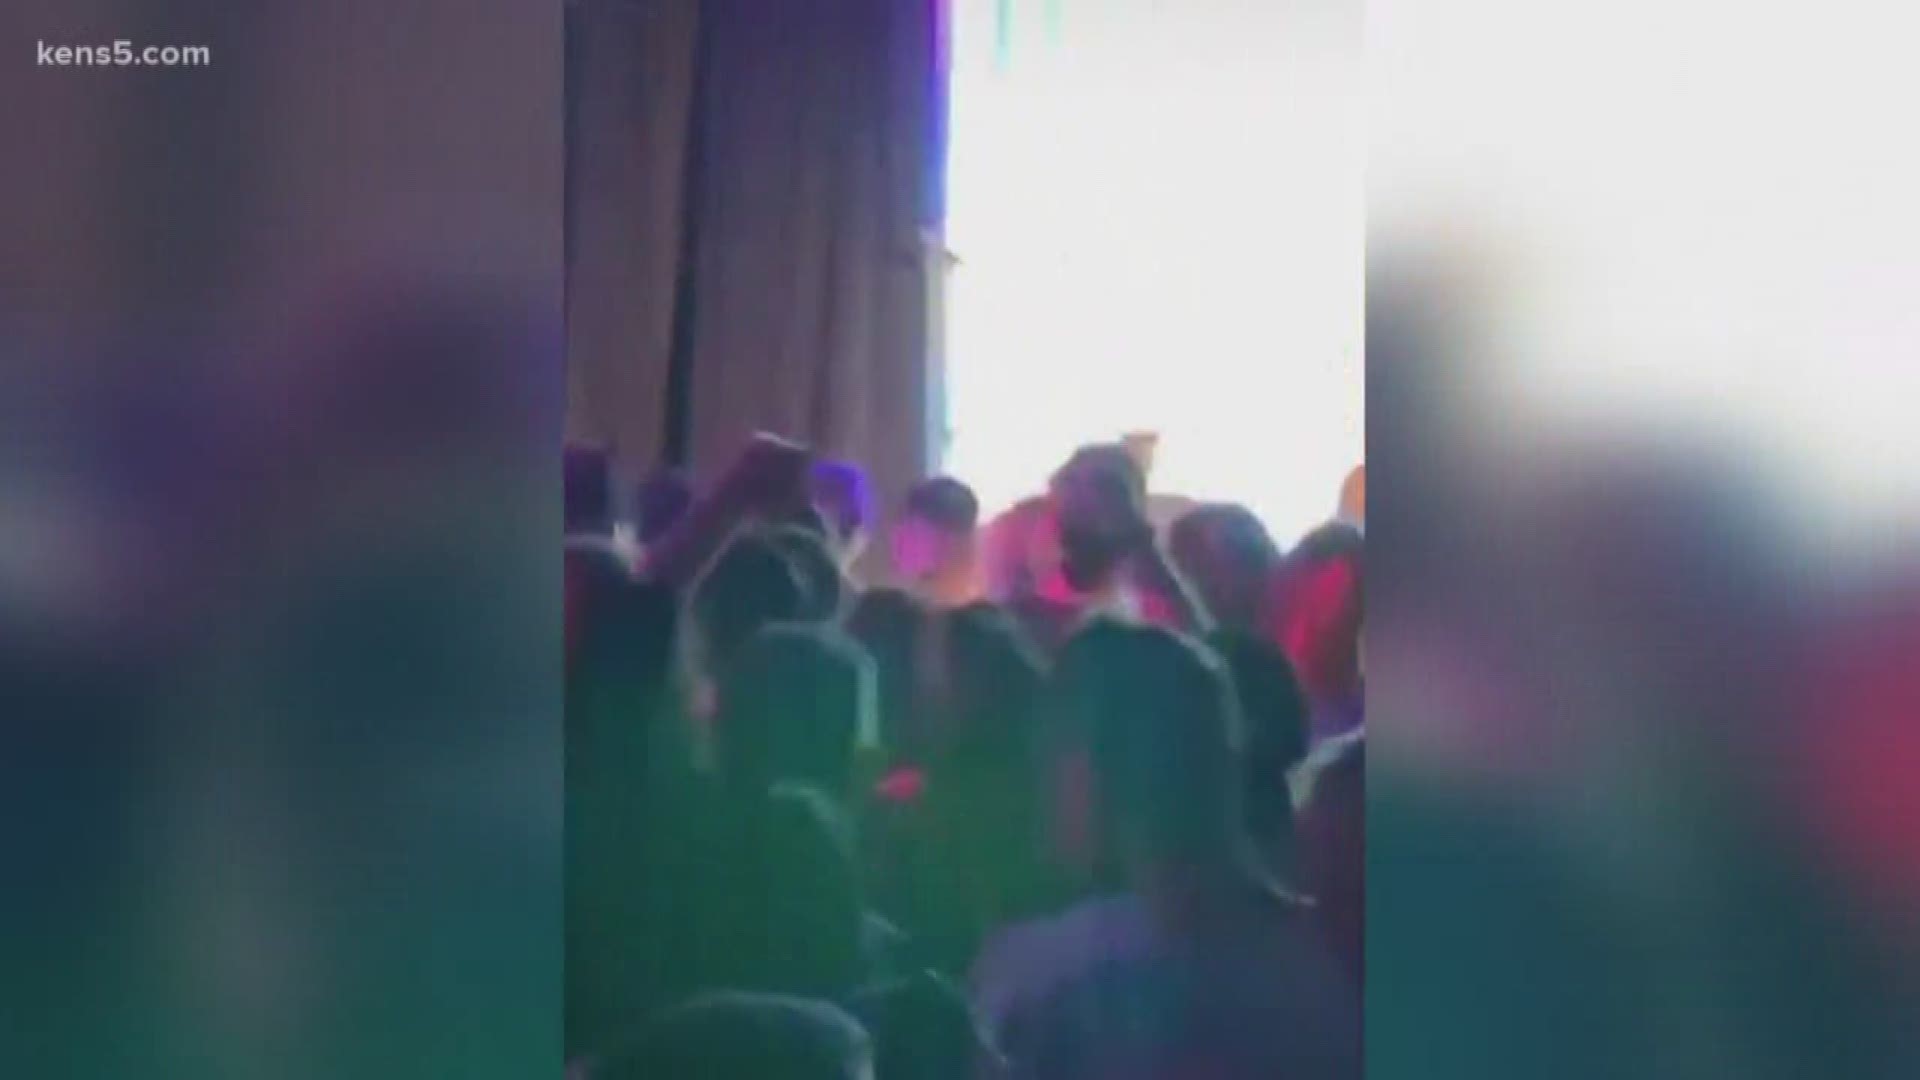 Ariana Grande surprised many when she appeared at a San Antonio club Wednesday night, and some local drag queens made sure to put on a show for her.